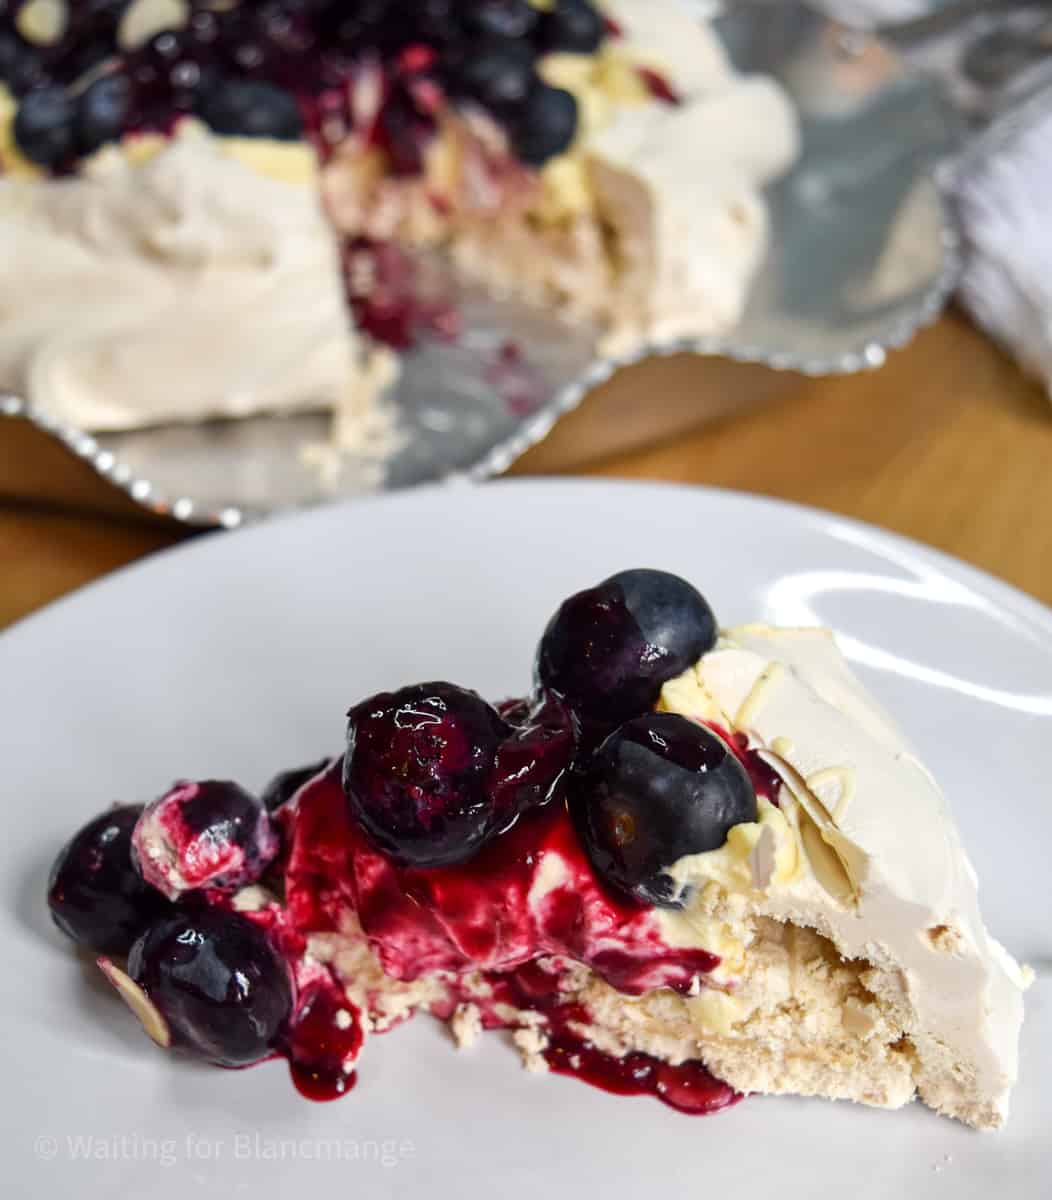 Blueberry pavlova with blueberry sauce and fresh blueberries on top.